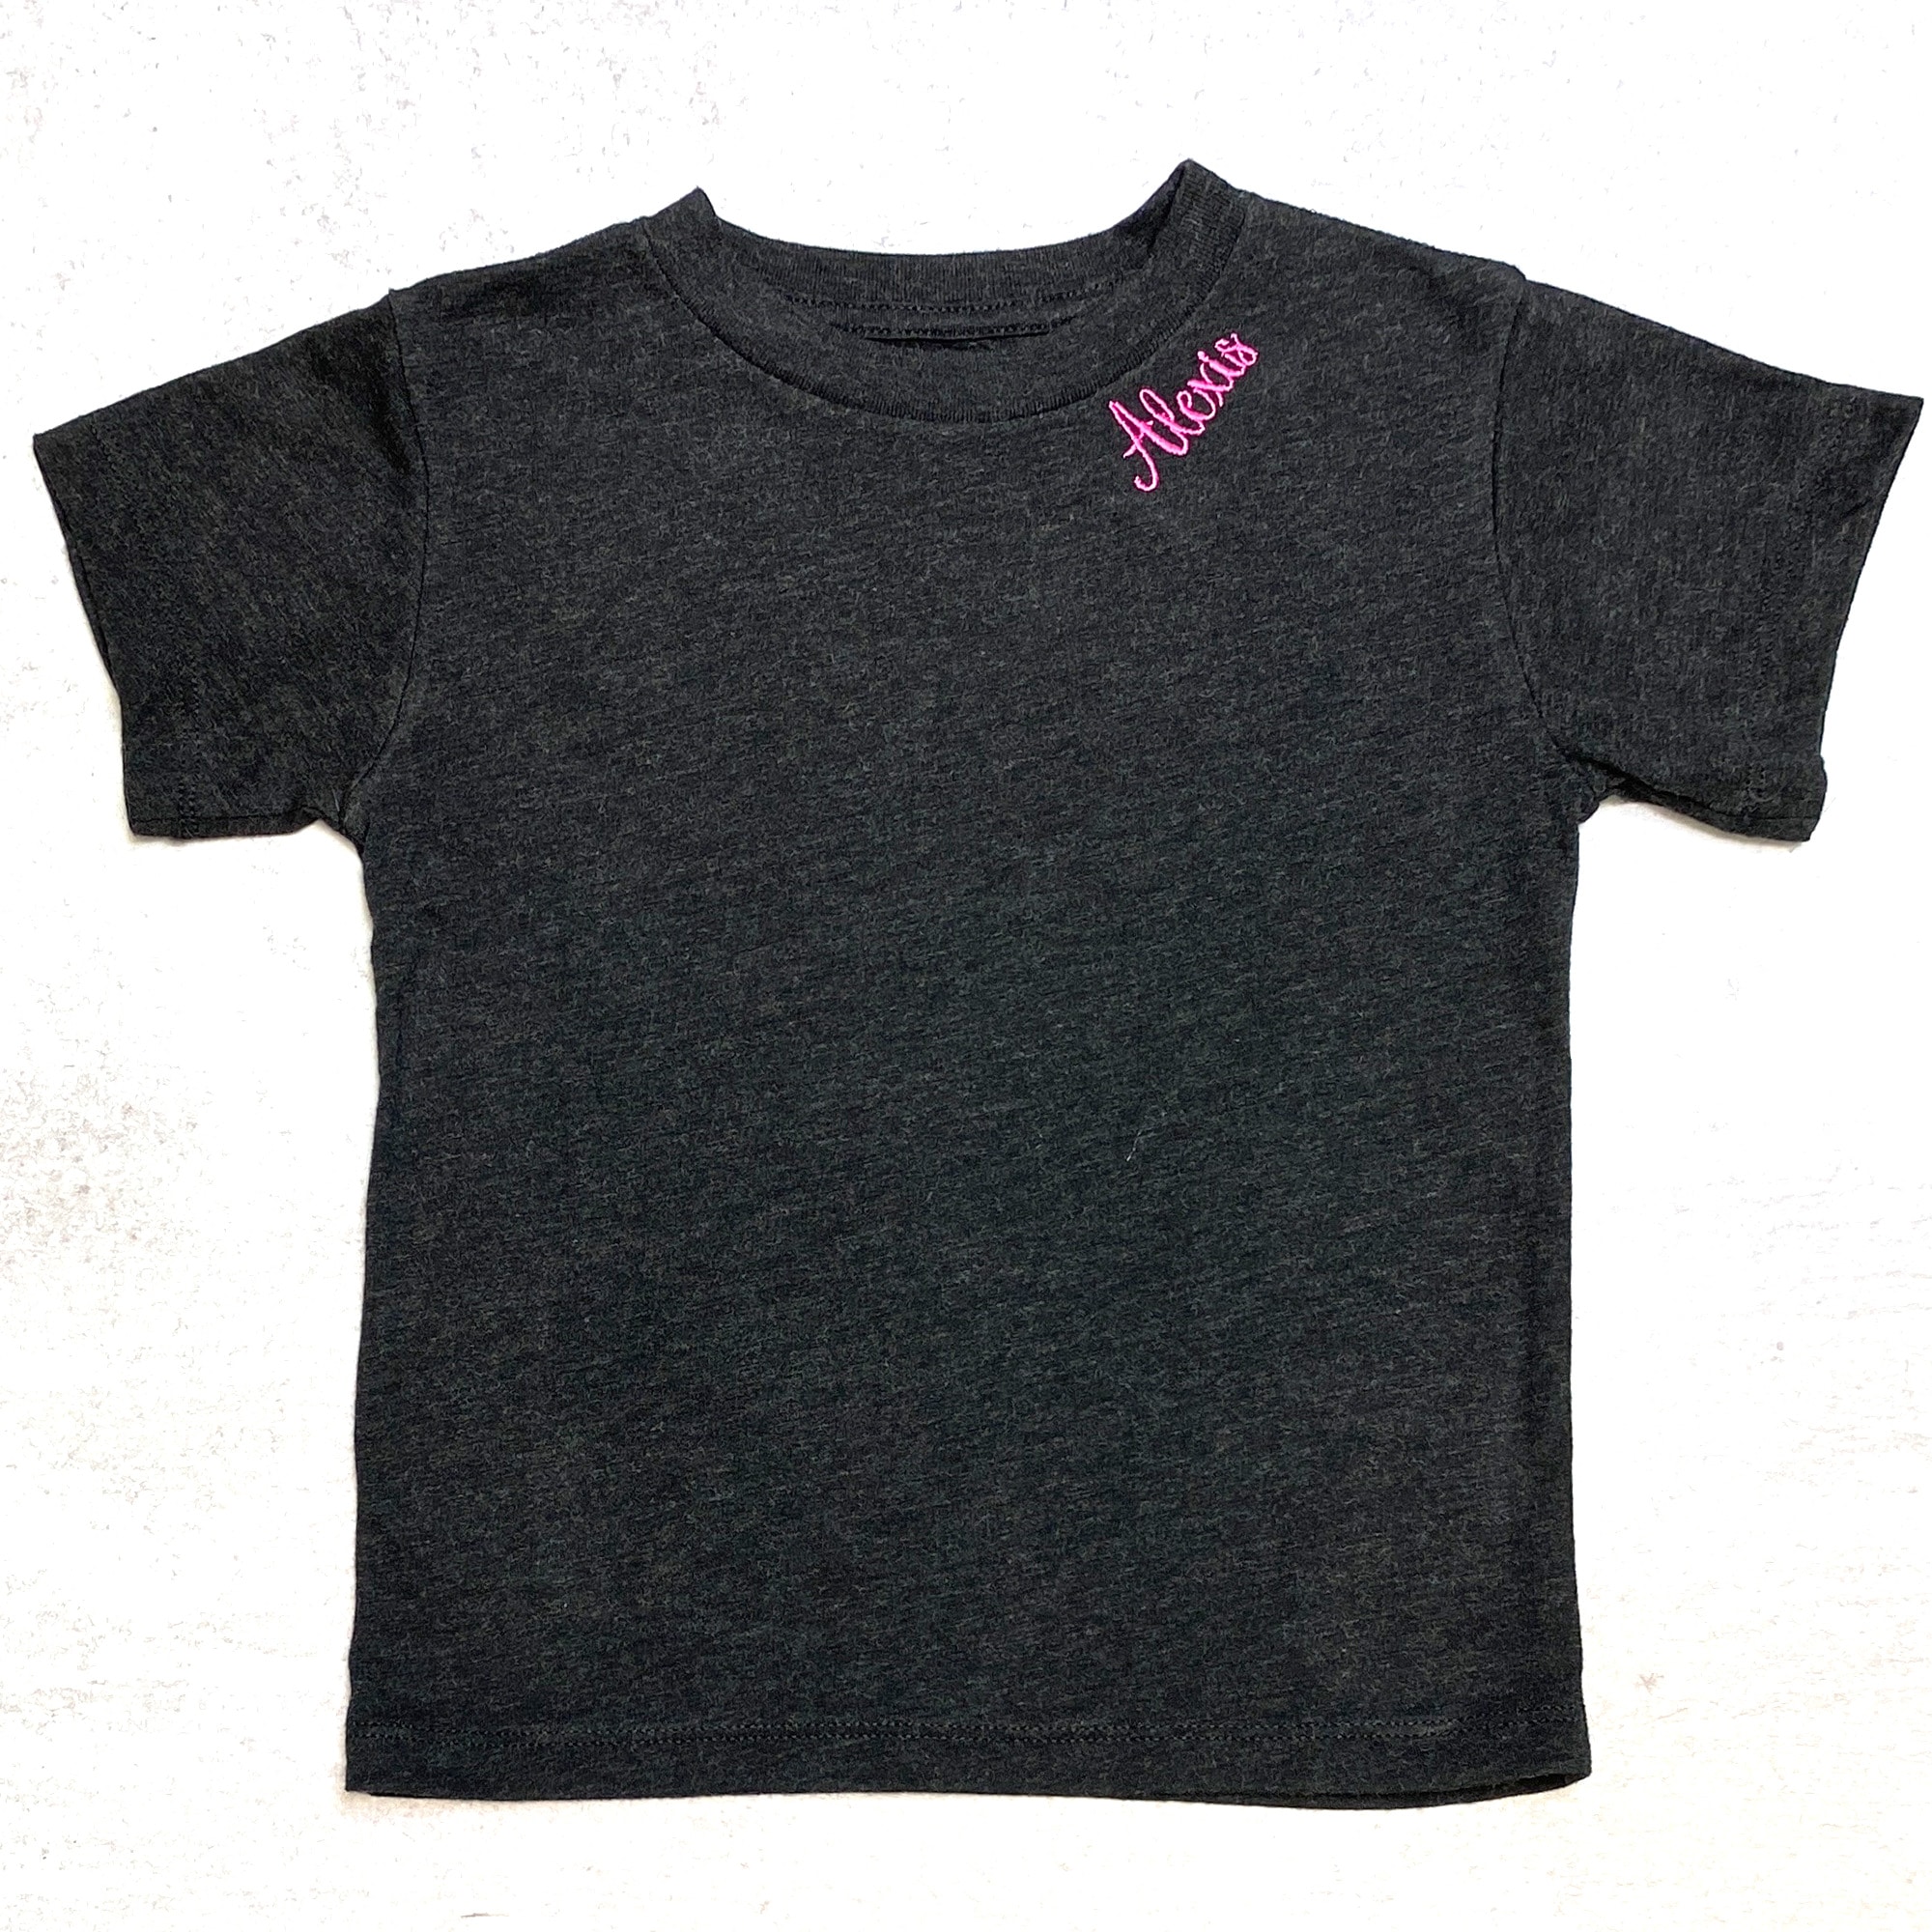 Toddler Triblend Short Sleeve Tee - Embroidered with a Name - MARCELA